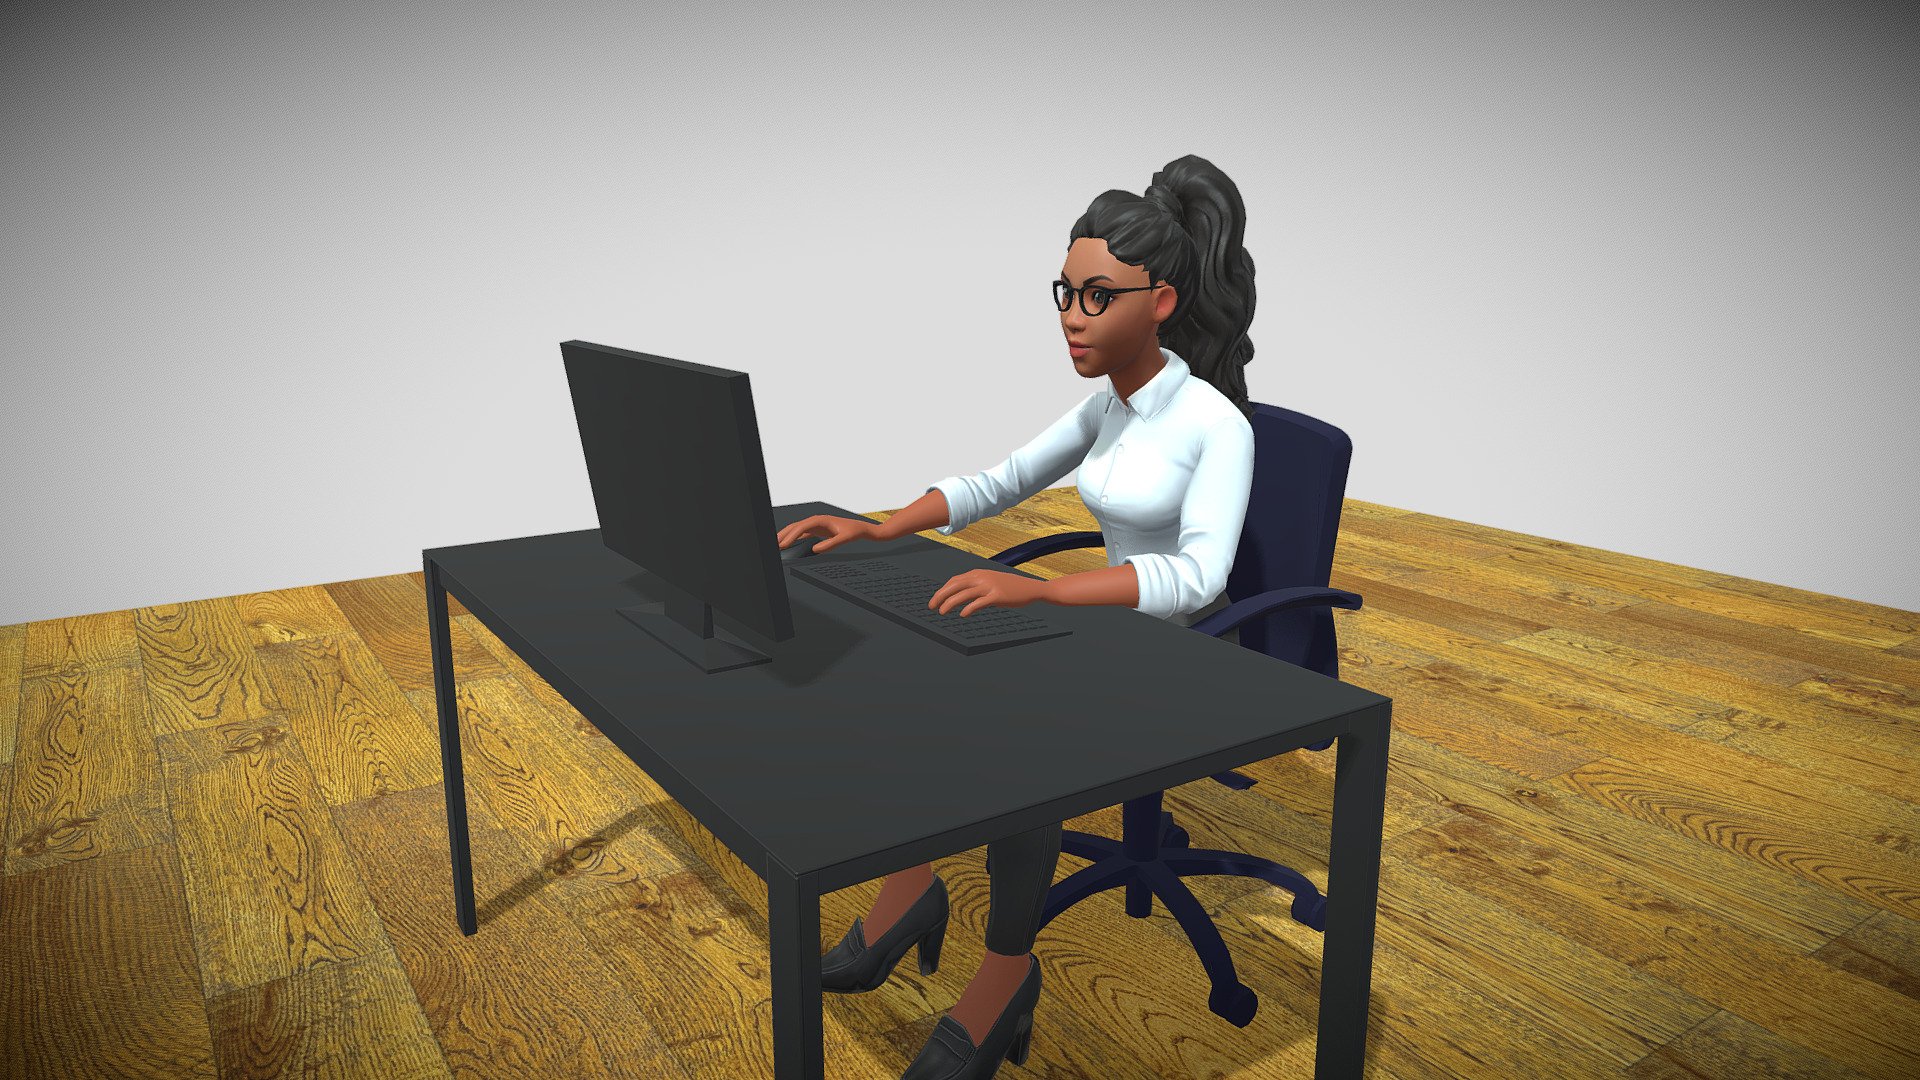 Office Worker 6 Animated Download Free 3d Model By Tonyflanagan 09691ea Sketchfab 